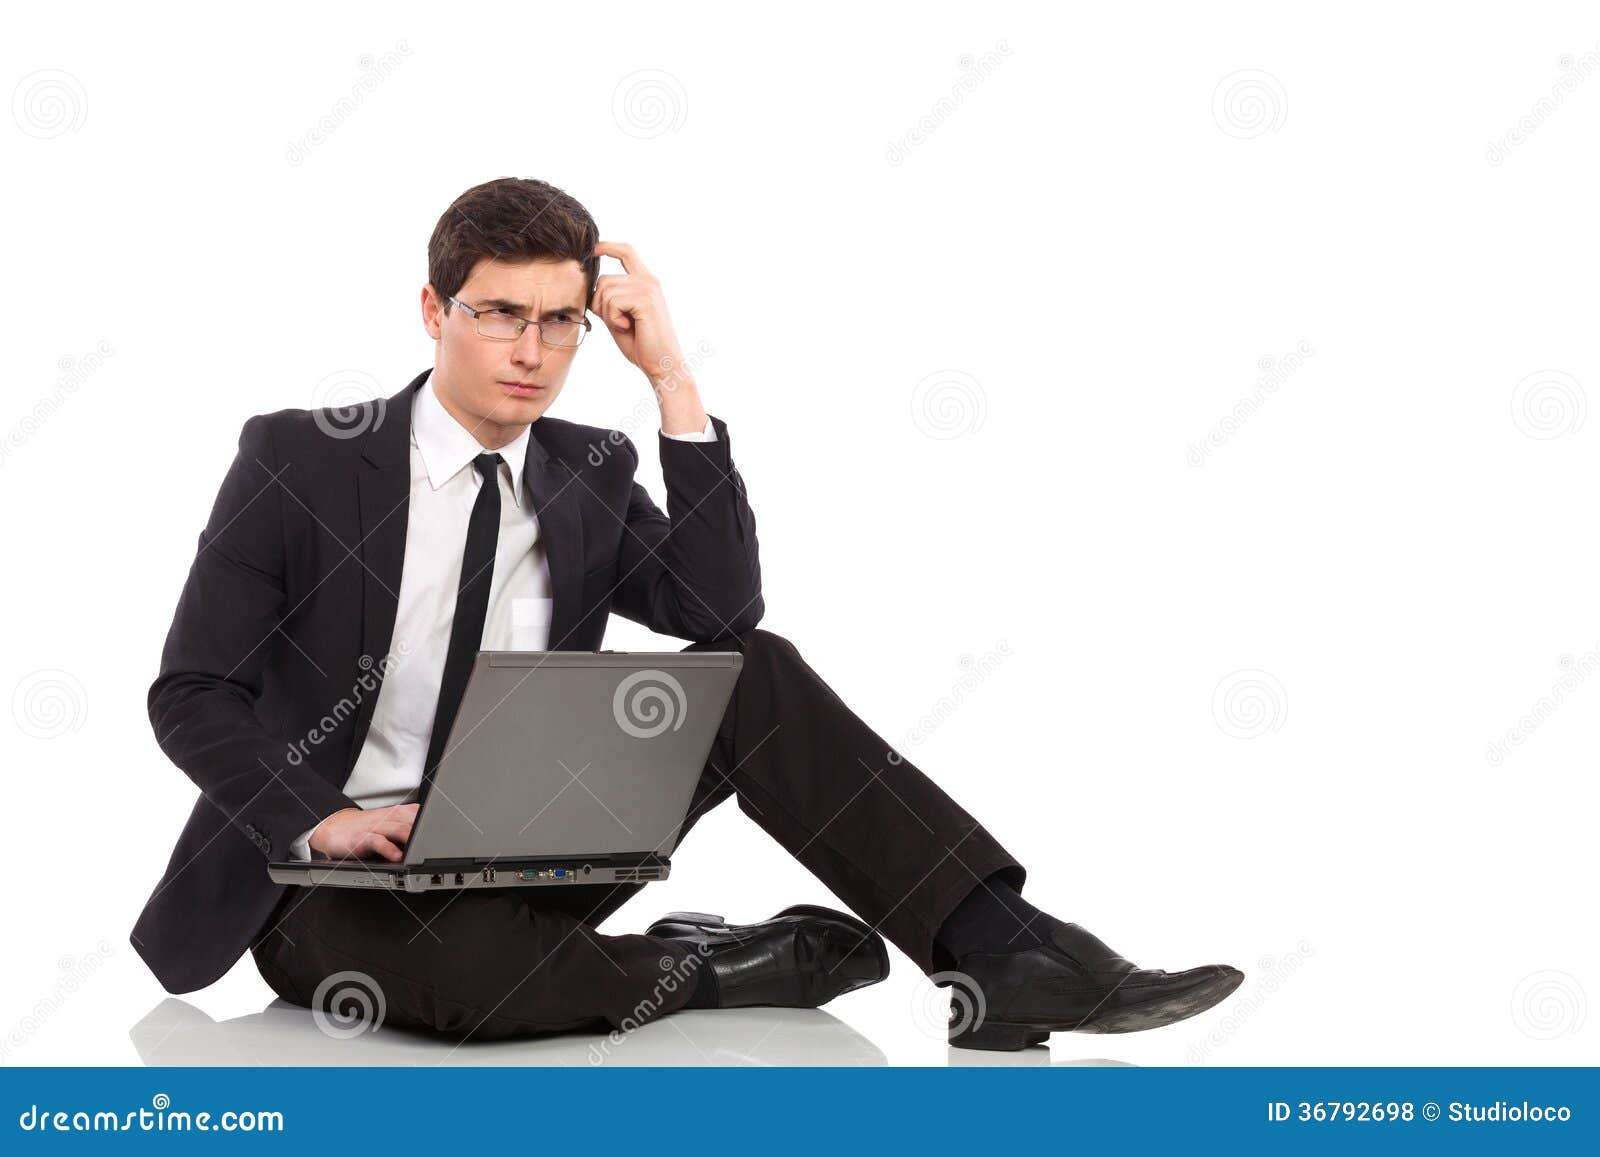 Image result for man thinking laptop "stock photo"